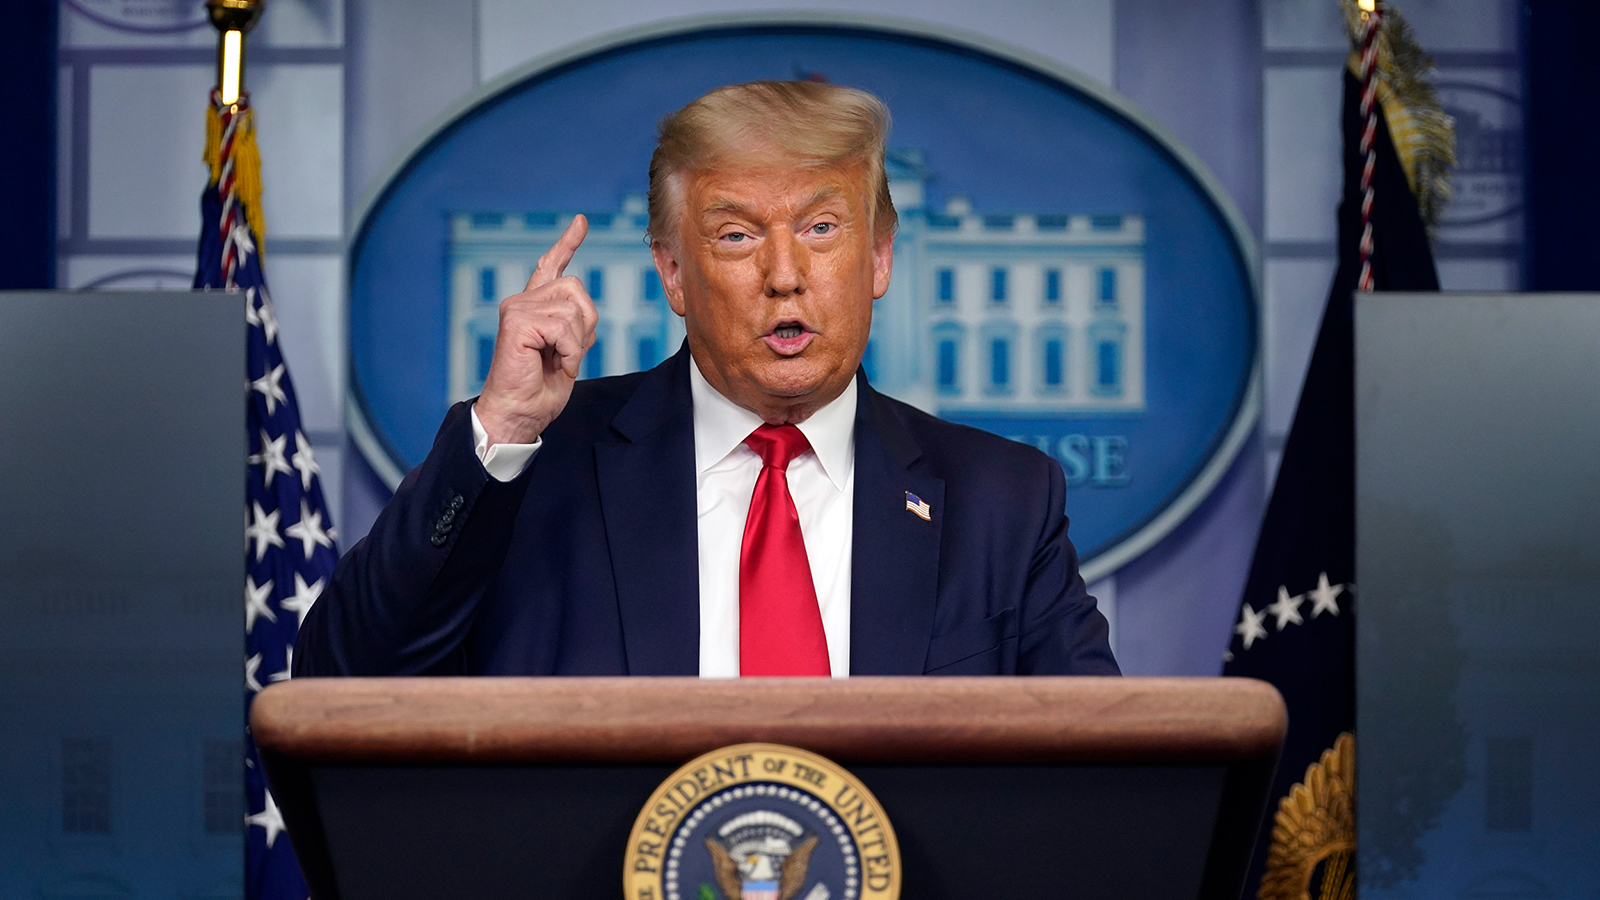 US President Donald Trump speaks during a news conference at the White House, Tuesday, July 28 in Washington.